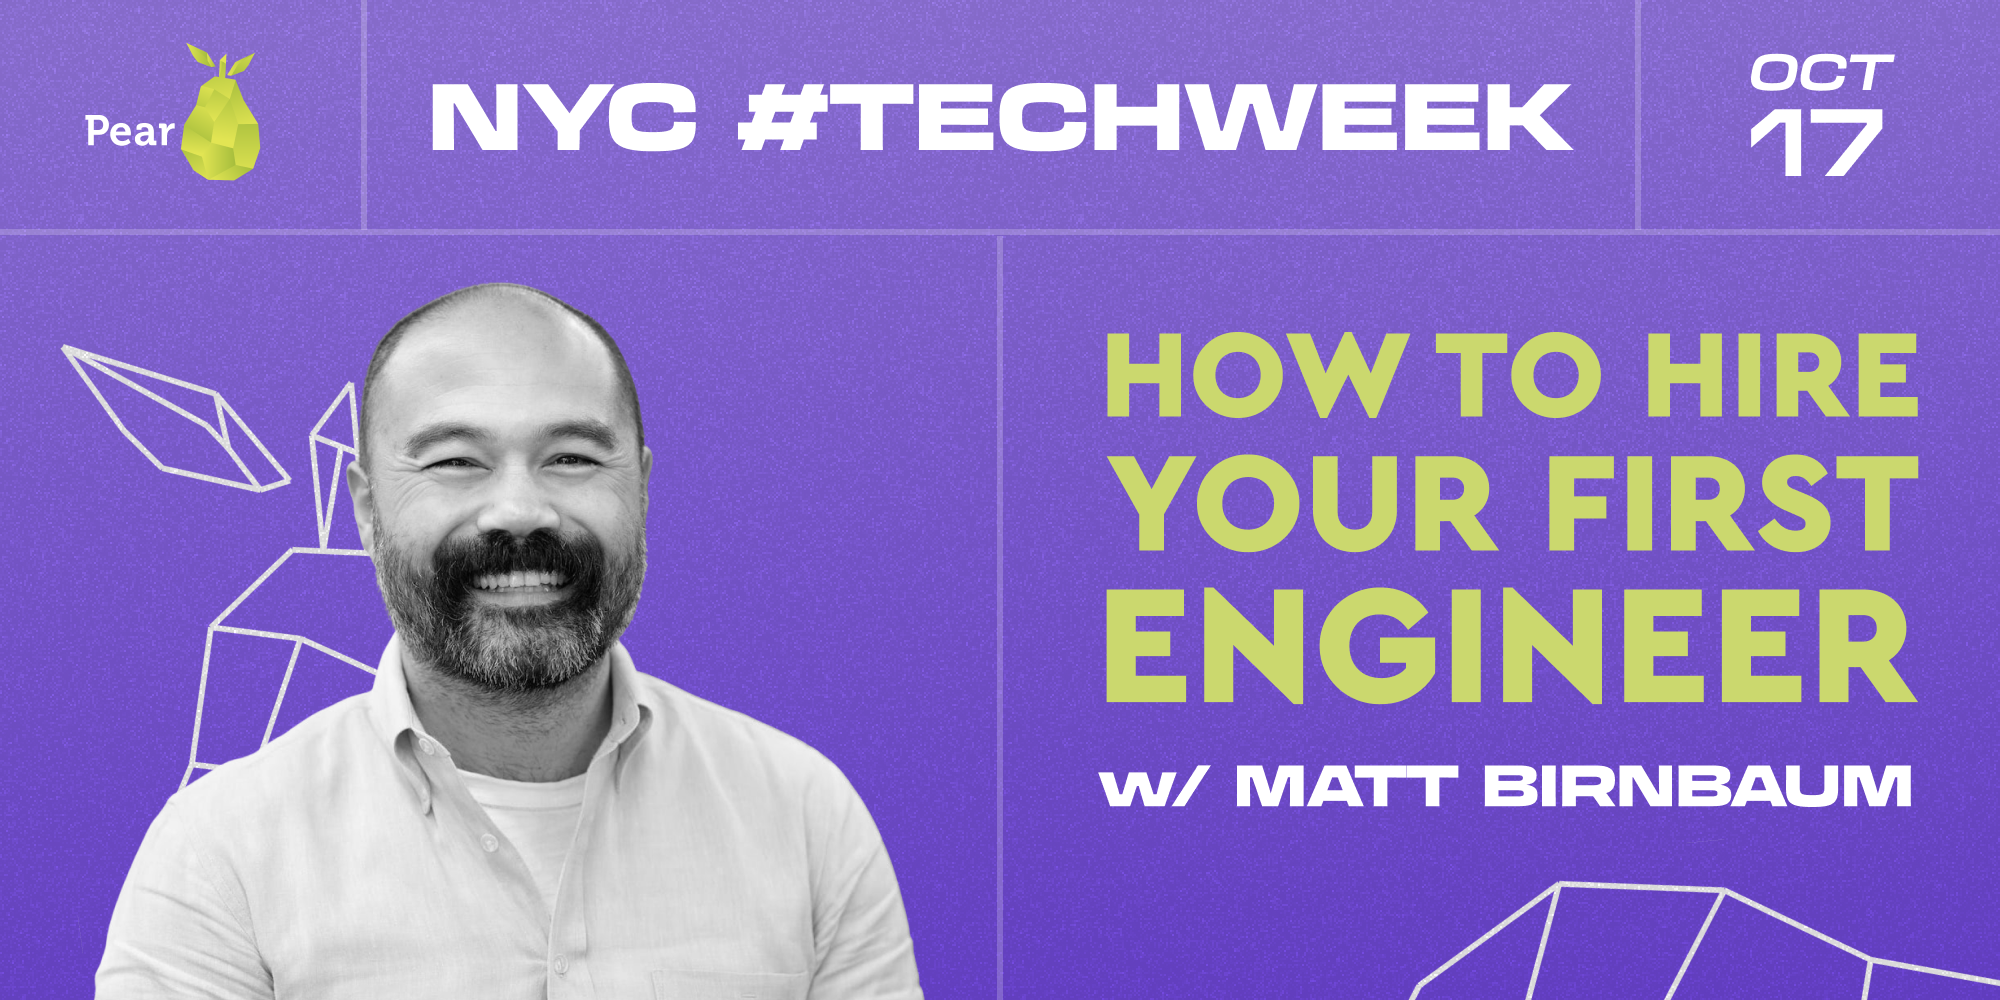 resources NYC #TechWeek x Pear VC: How to hire your first engineer with Matt Birnbaum, Talent Partner at Pear VC